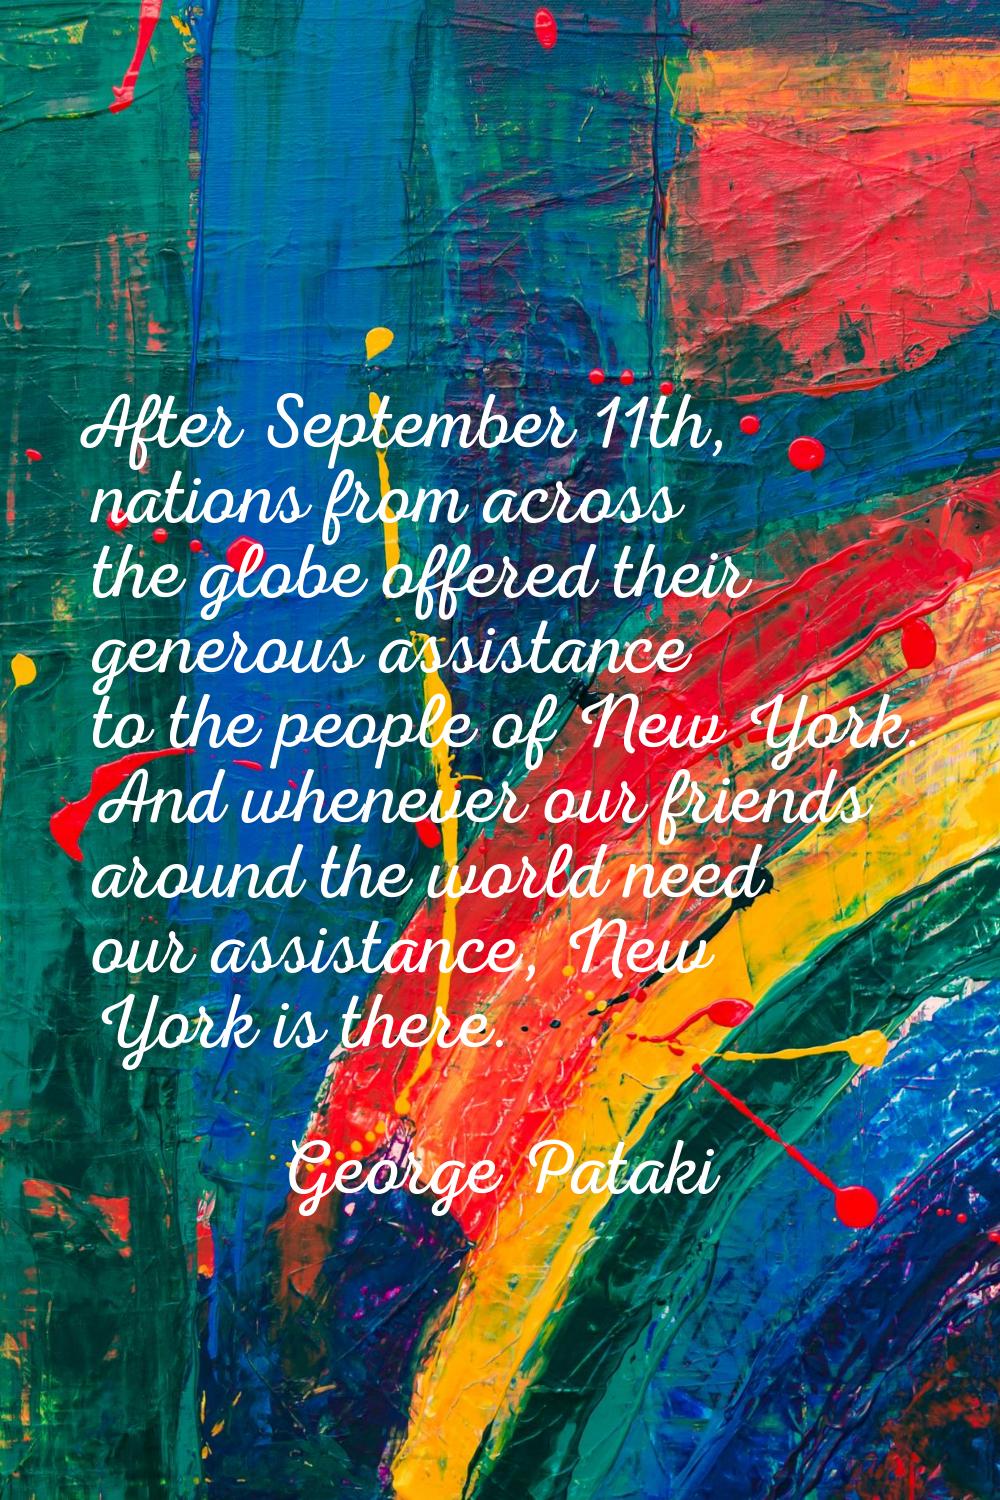 After September 11th, nations from across the globe offered their generous assistance to the people